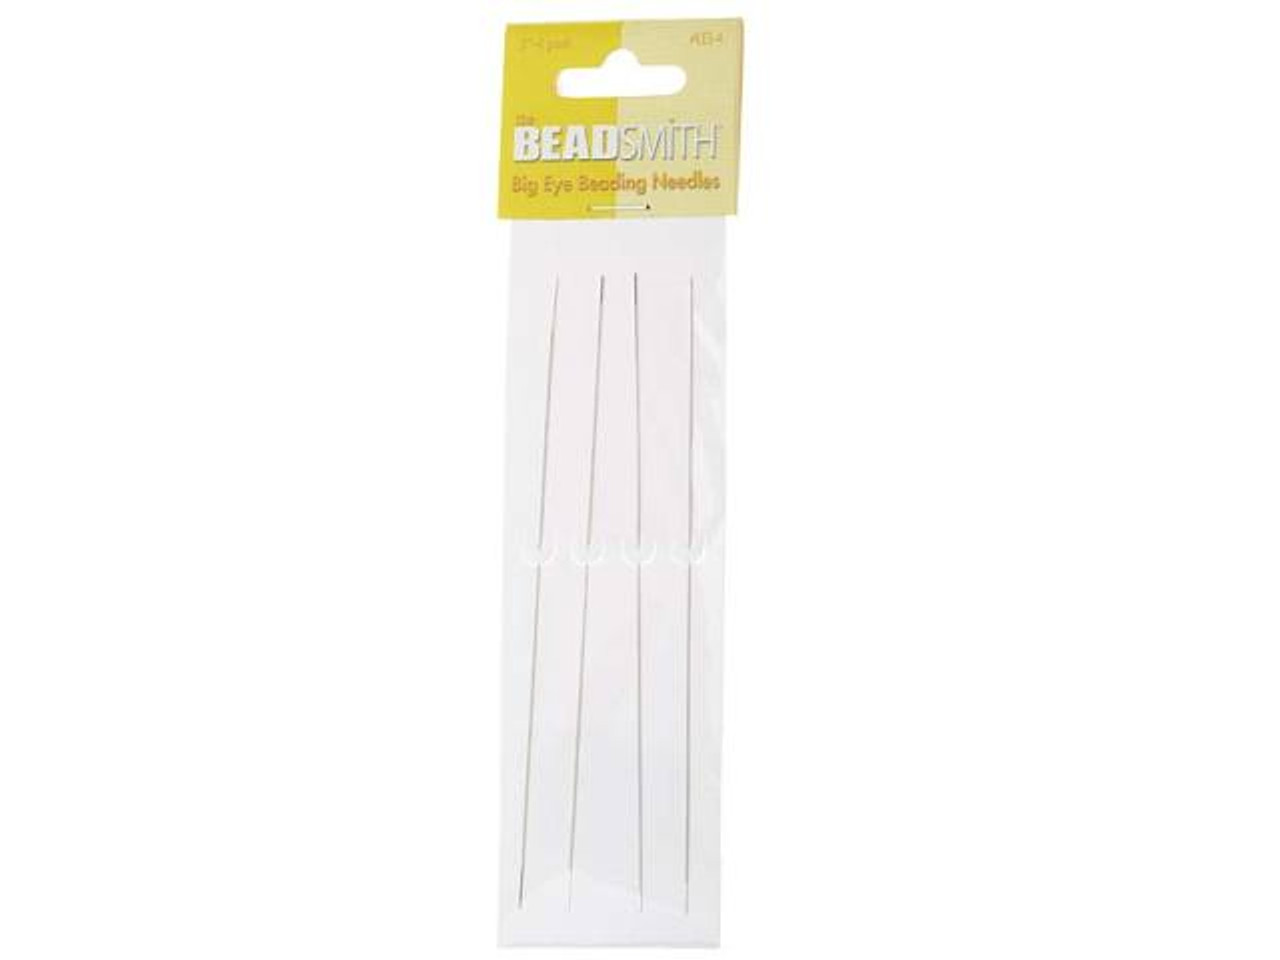 The Beadsmith Big Eye Beading Needles, 5 inches, 4 per Card, Sharp Points,  Use for General Sewing, Weaving and Embroidery, Very Easy to Thread 5 Long  - 4 Needles